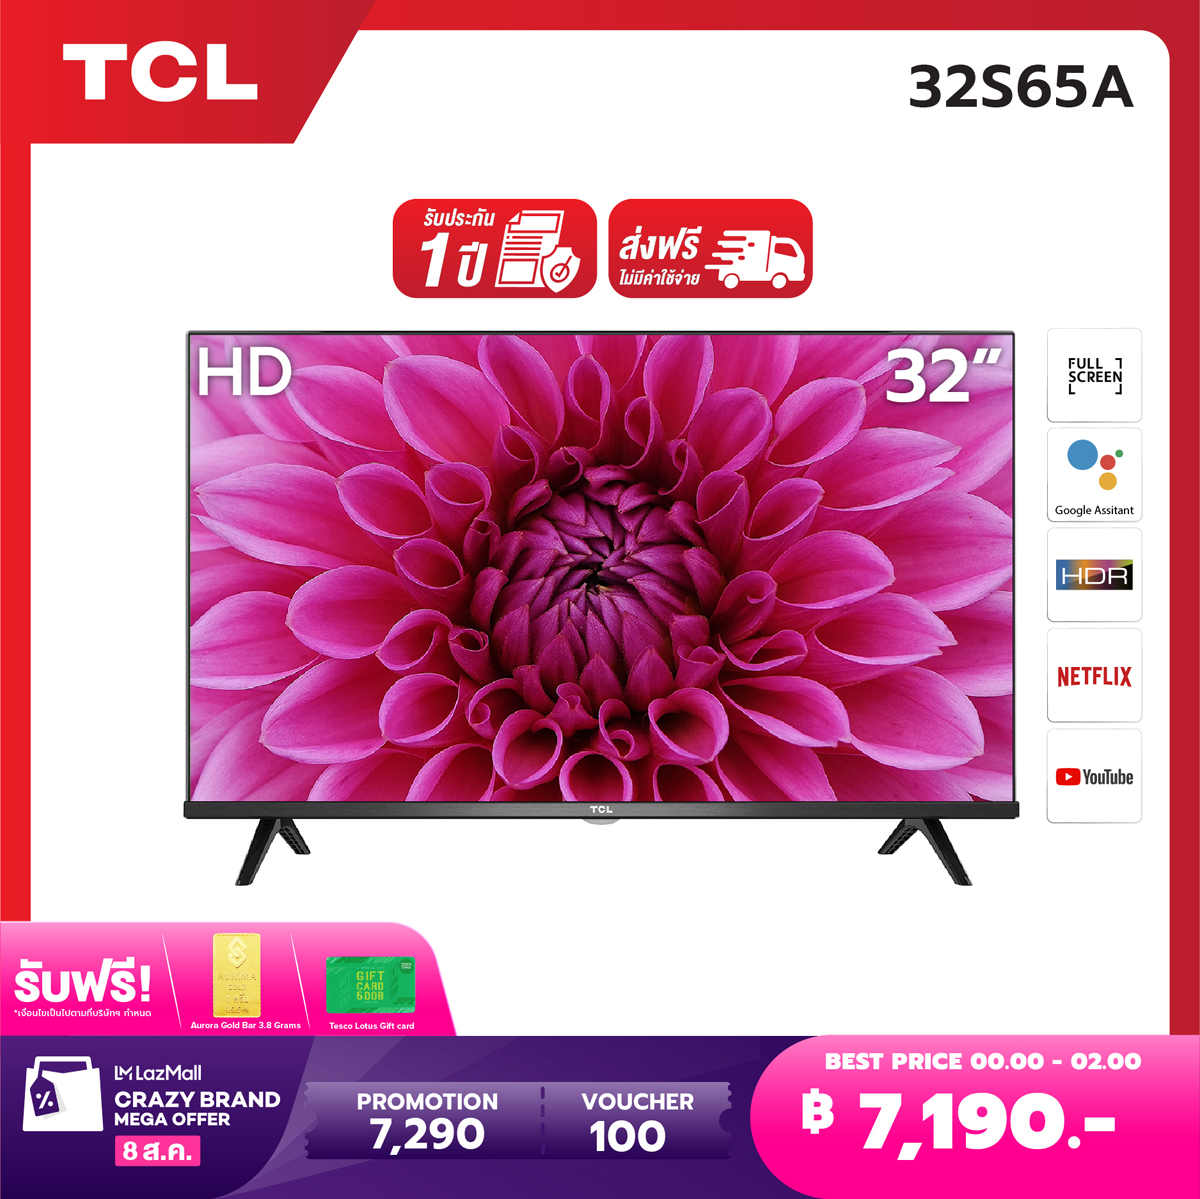 ANDROID TV 32 HD l TCL 32 นิ้ว LED Wifi HD 720P Android Smart TV (รุ่น 32S65A)-HDMI-USB-DTS-Frameless-Google assistant / Netflix / Youtube- 1.5G RAM+8GROM-Free Voice Search remote